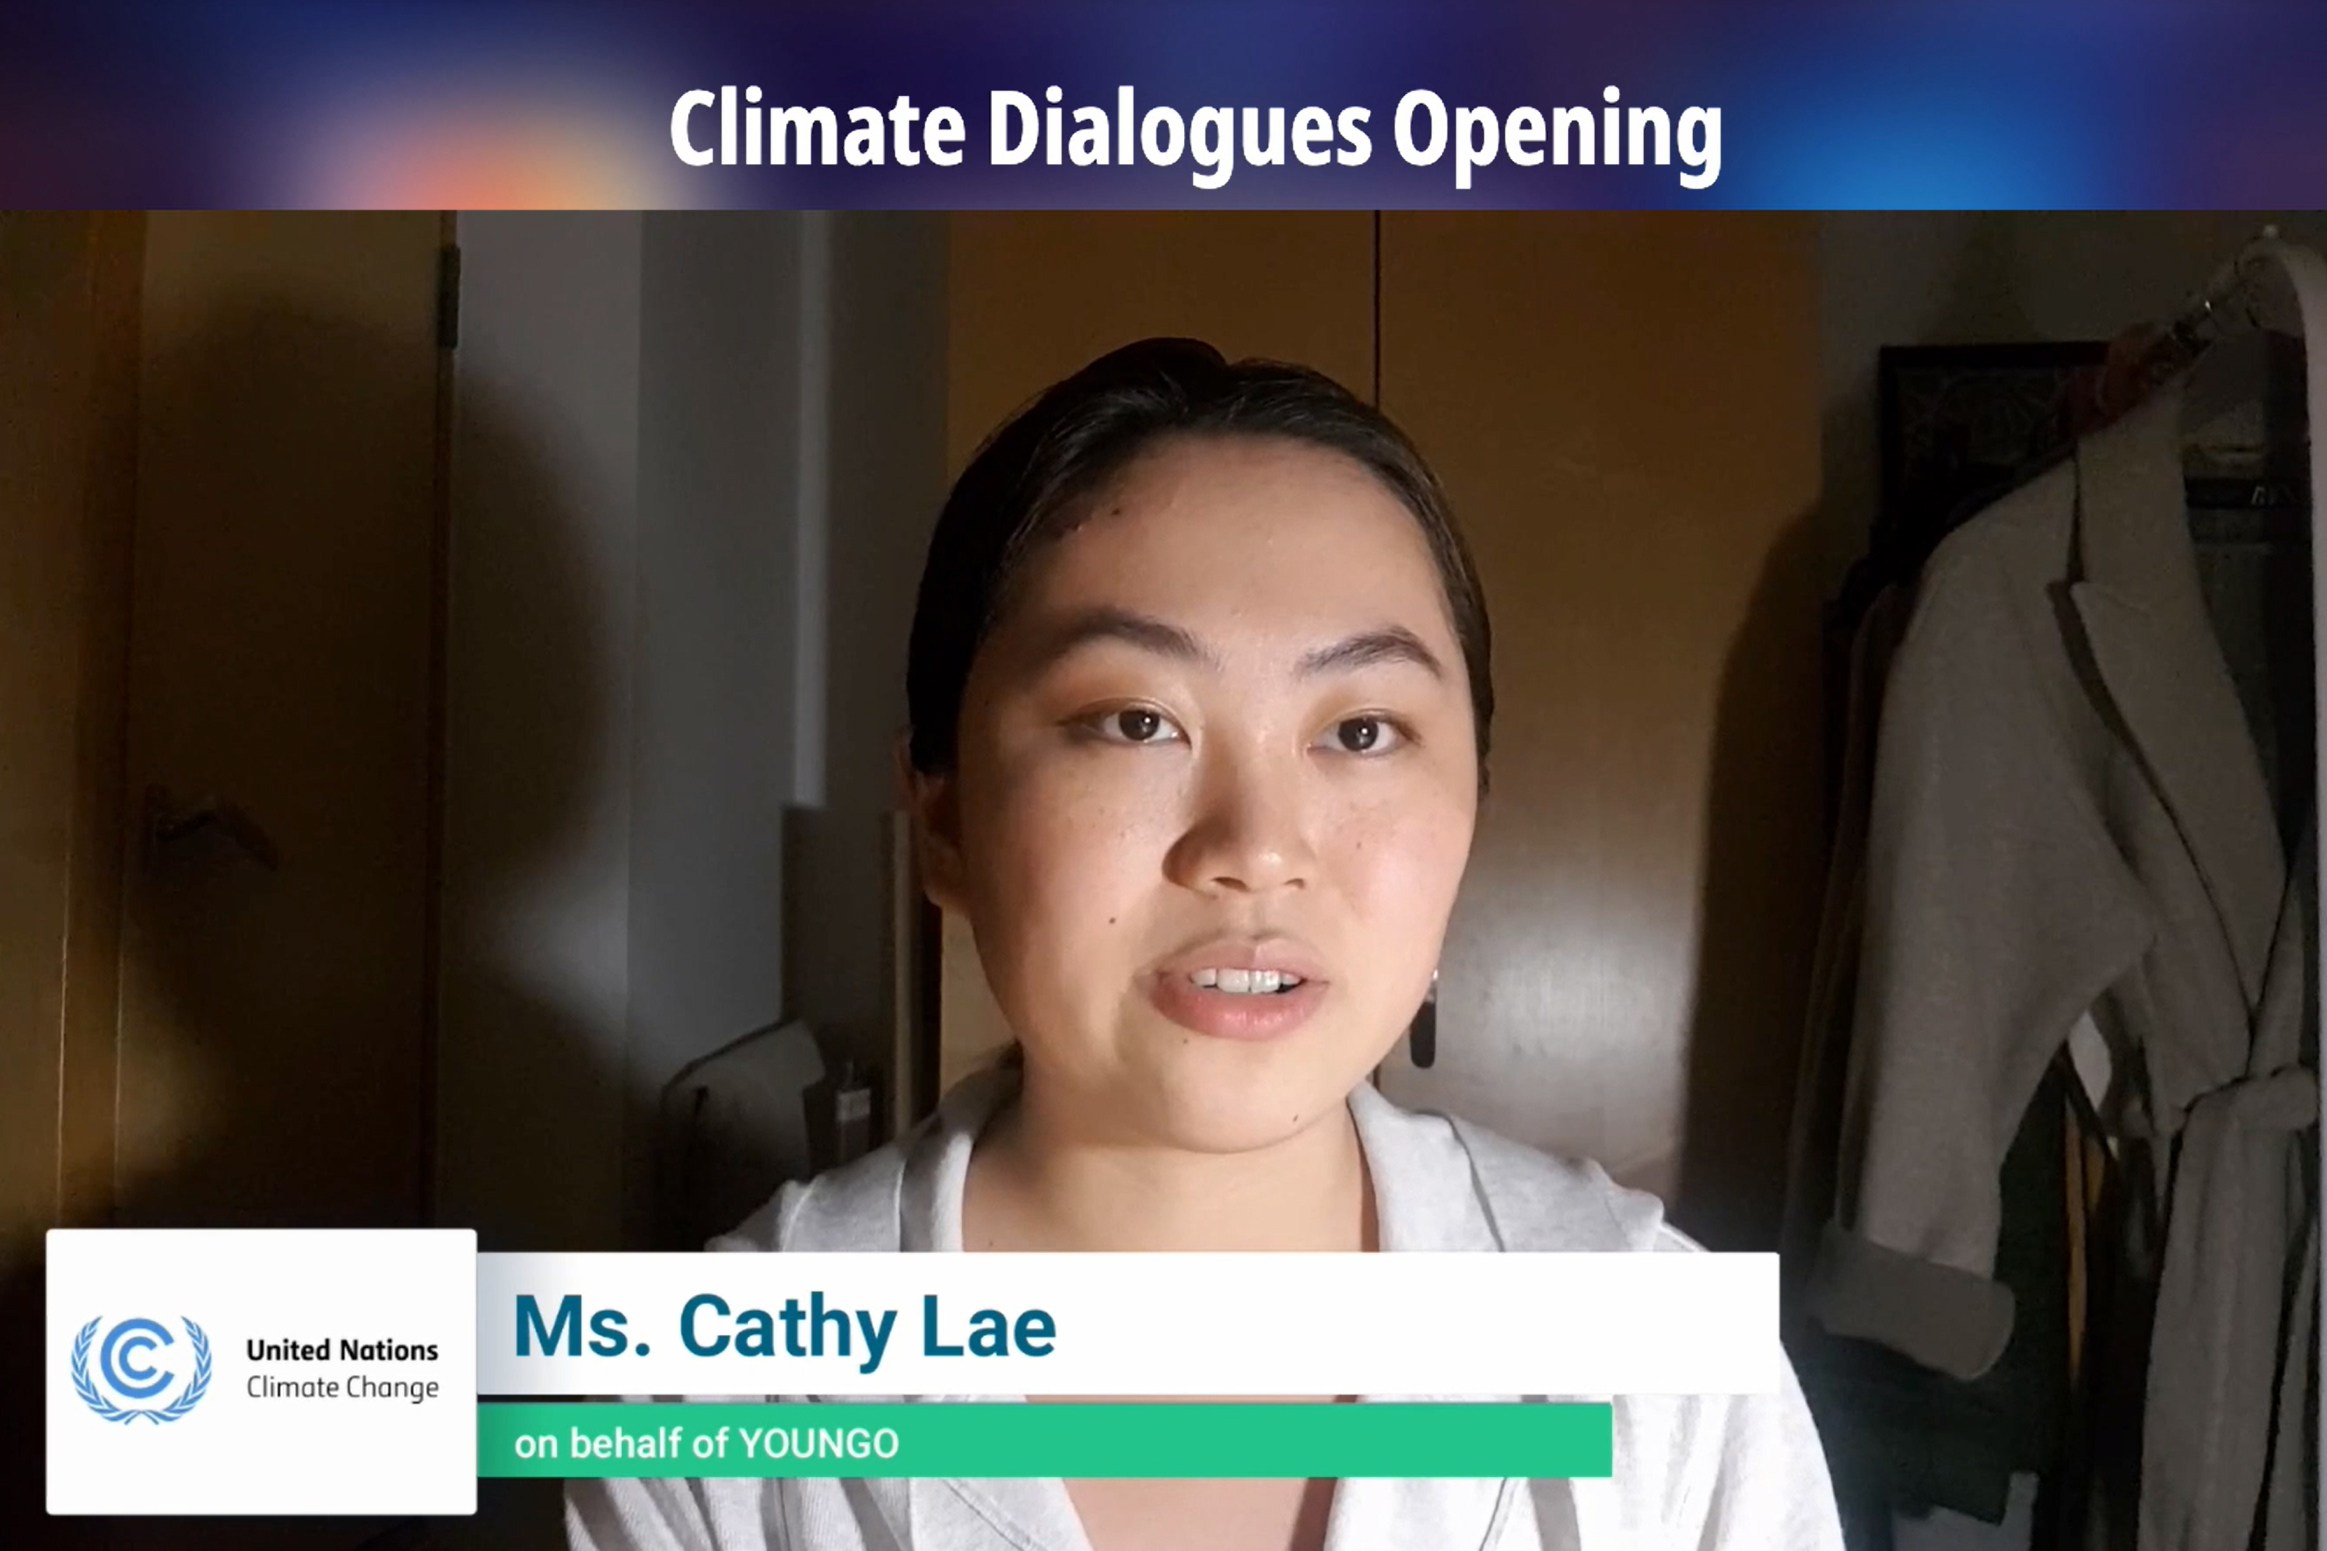 Cathy Lae, on behalf of YOUNGO